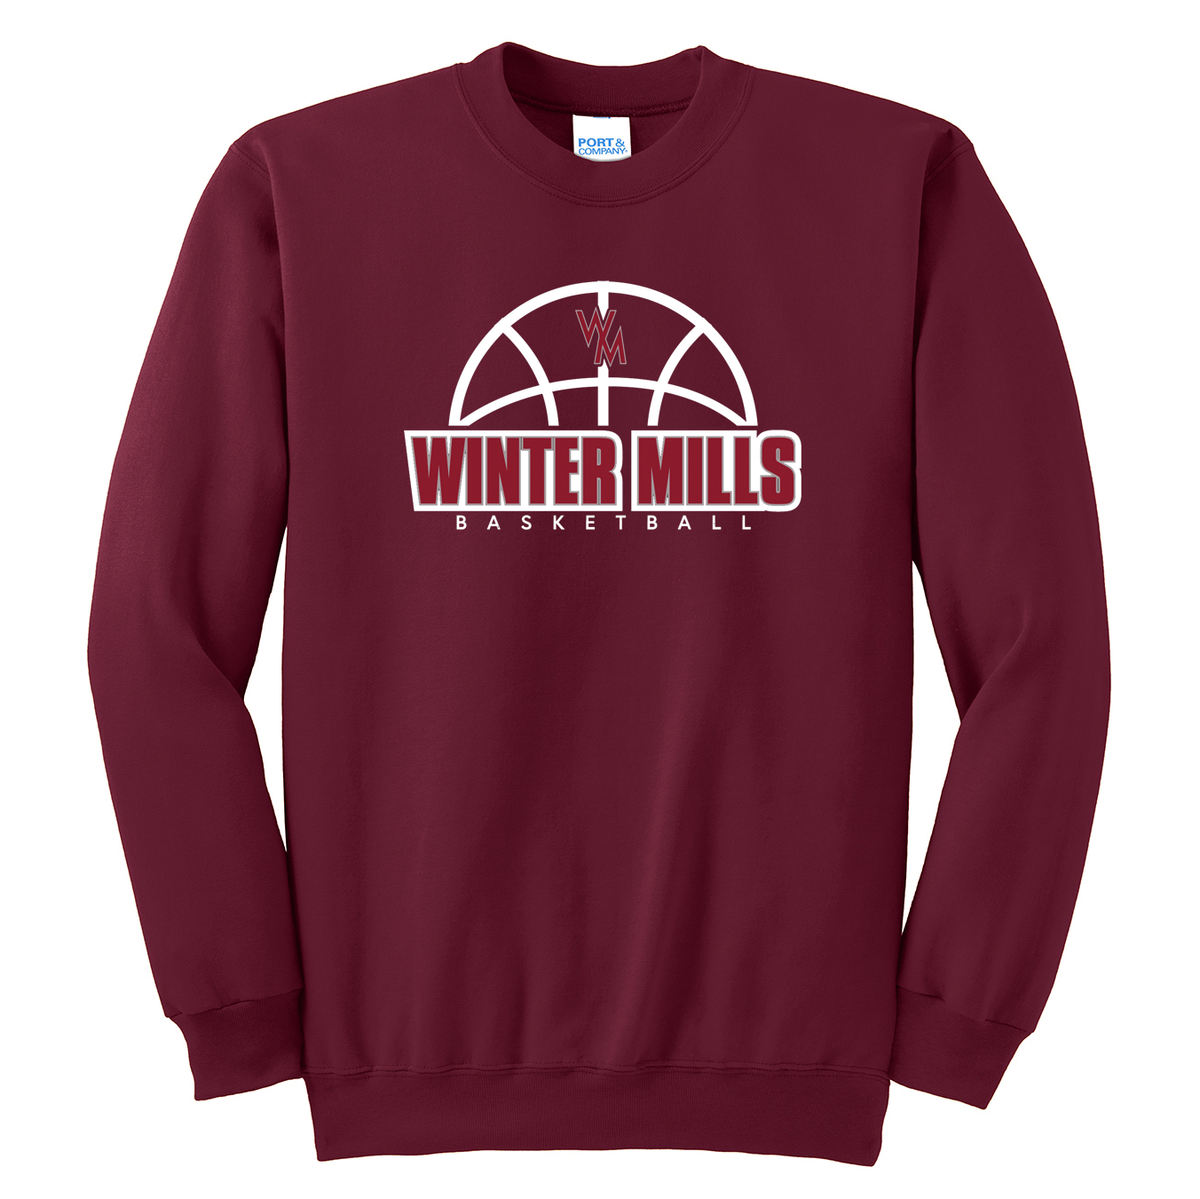 Winters Mill HS Basketball Crew Neck Sweater